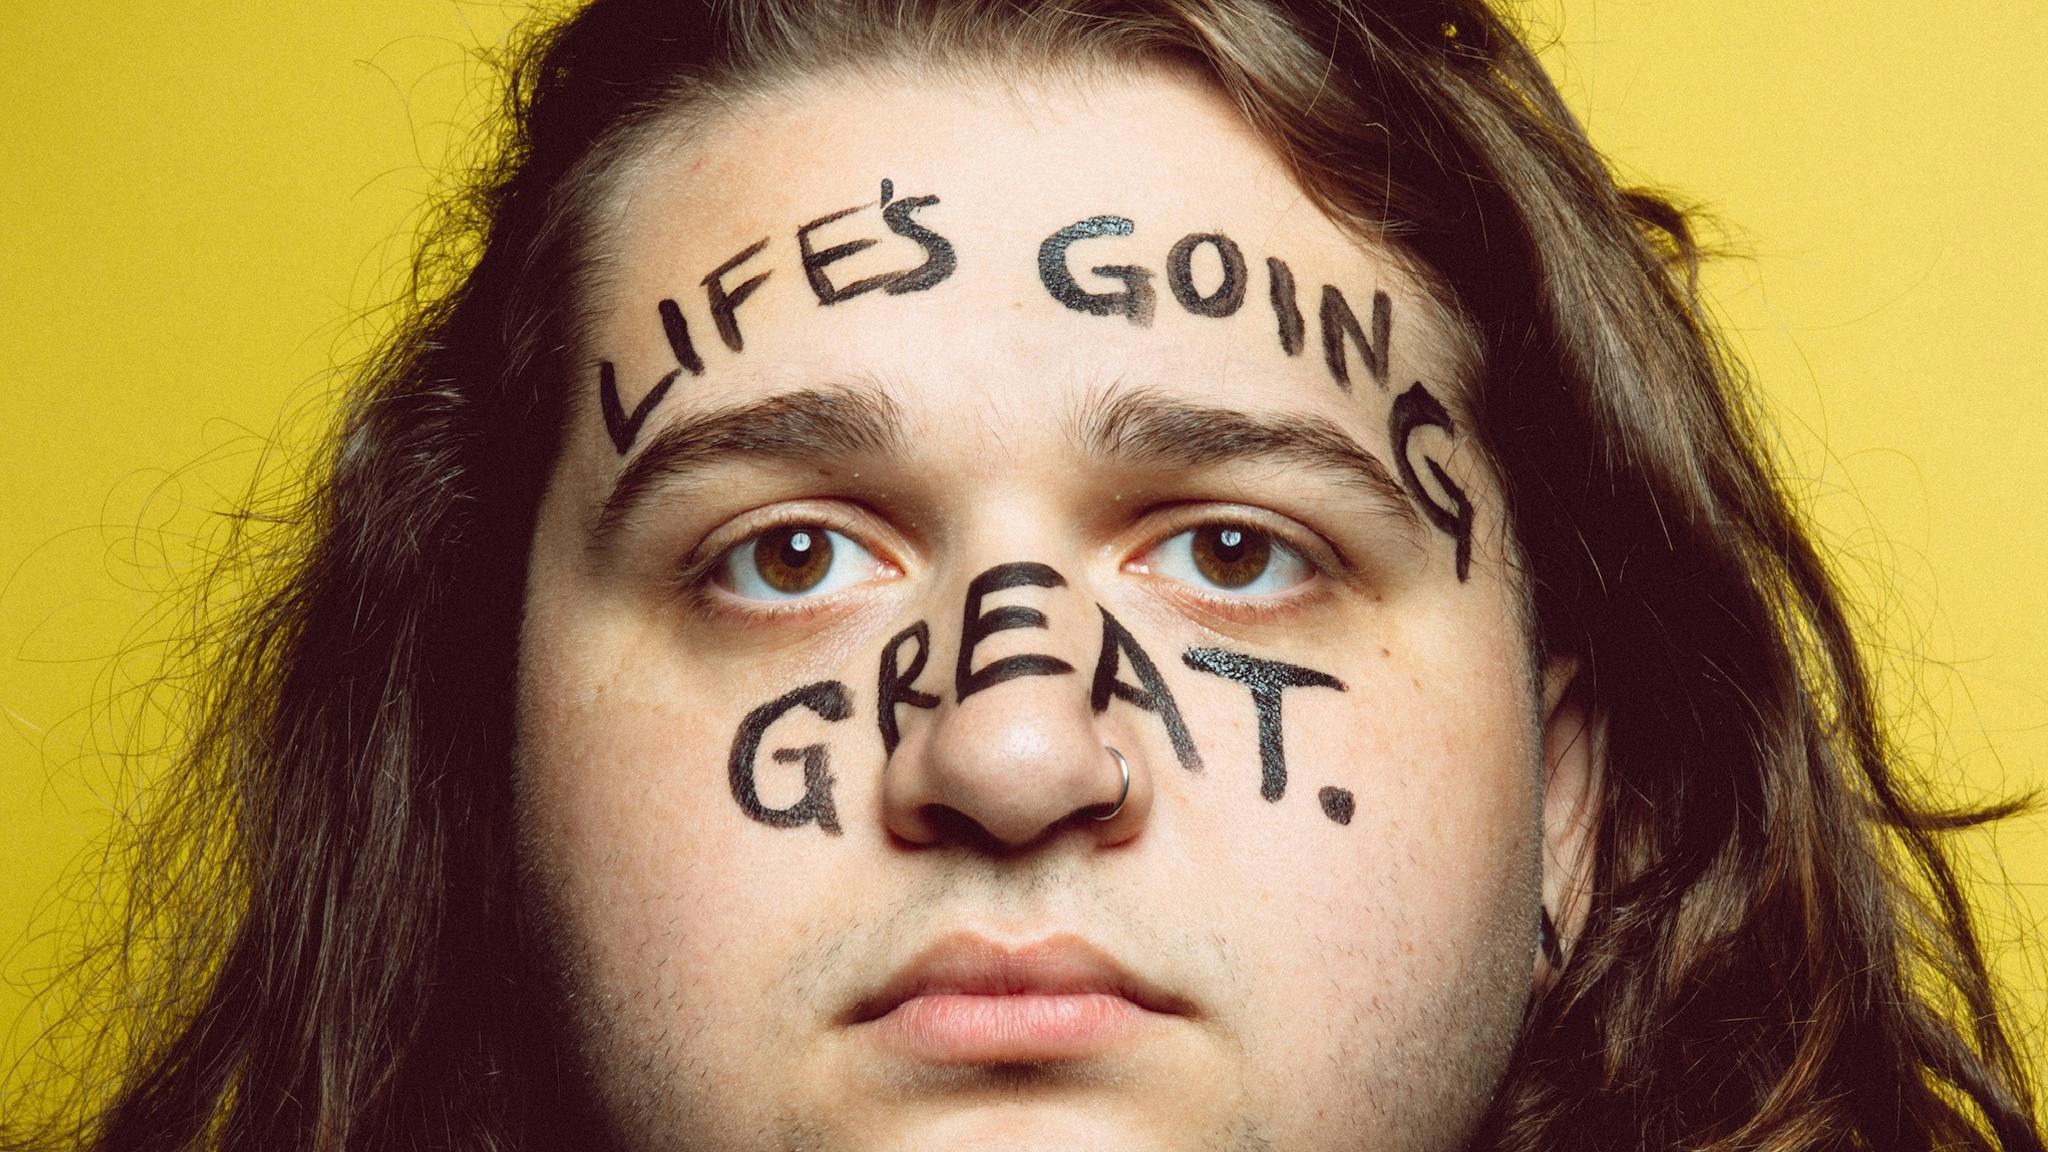 Games We Play announces debut album, Life’s Going Great